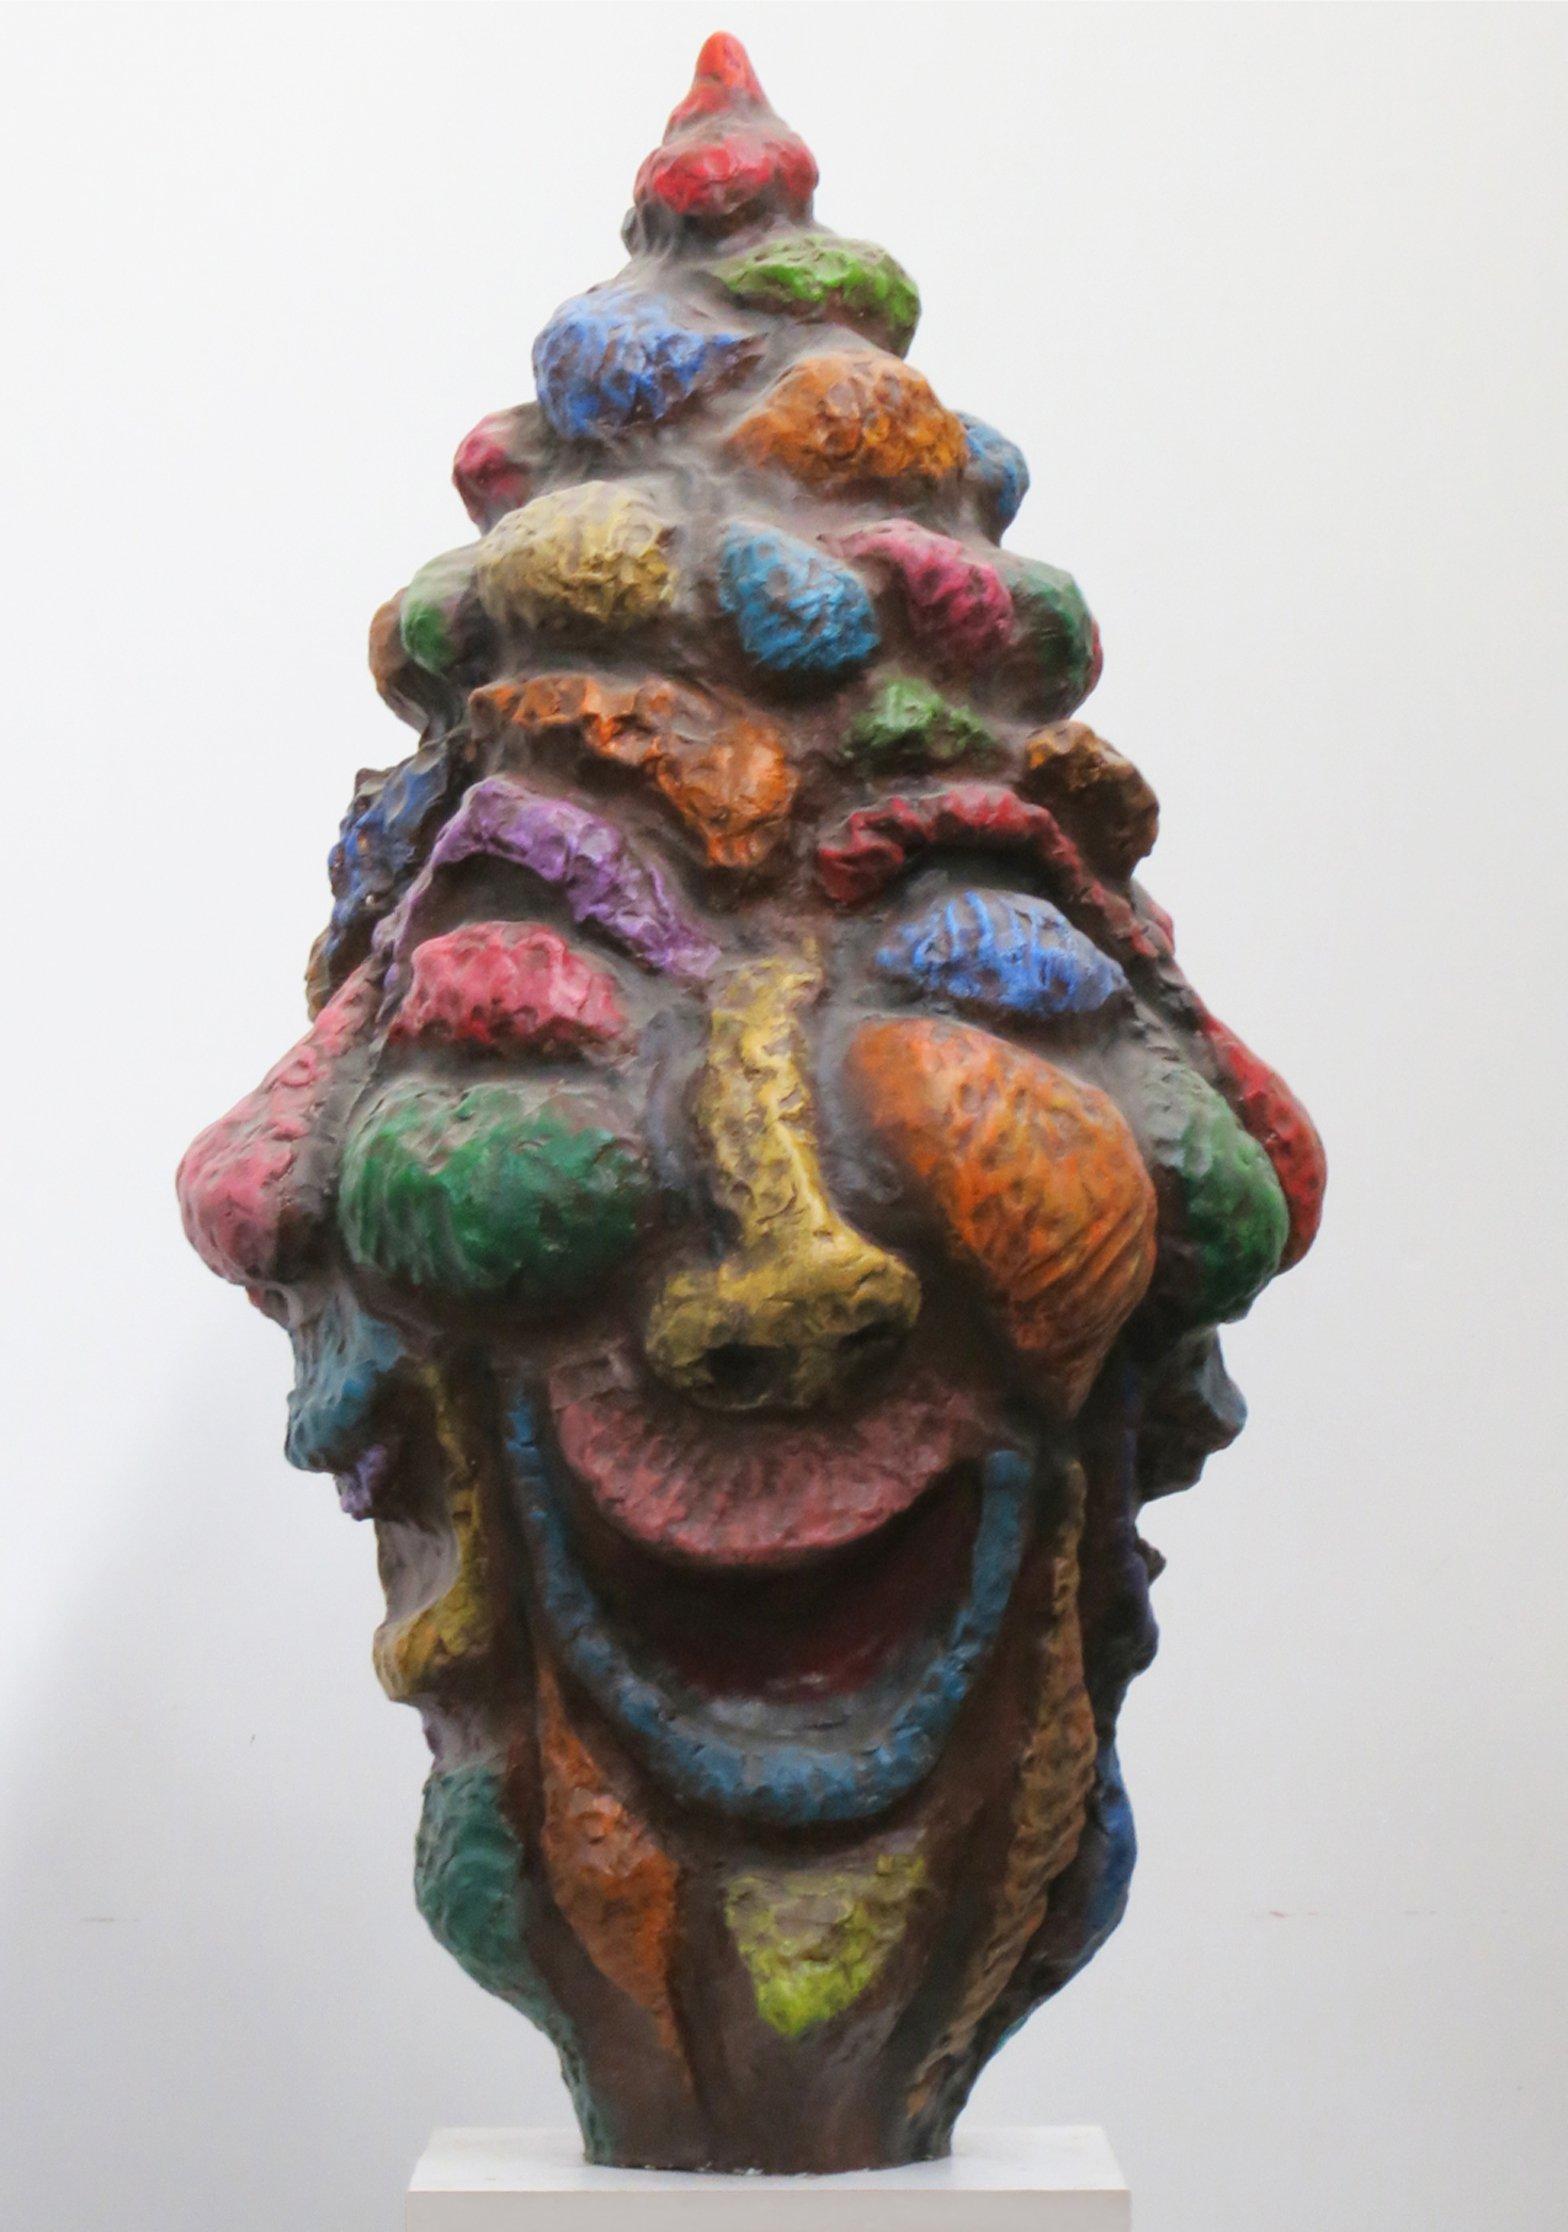 Howard Kalish Figurative Sculpture - "Large Head (Trickster)" with four laughing faces in orange, green, blue, pink 